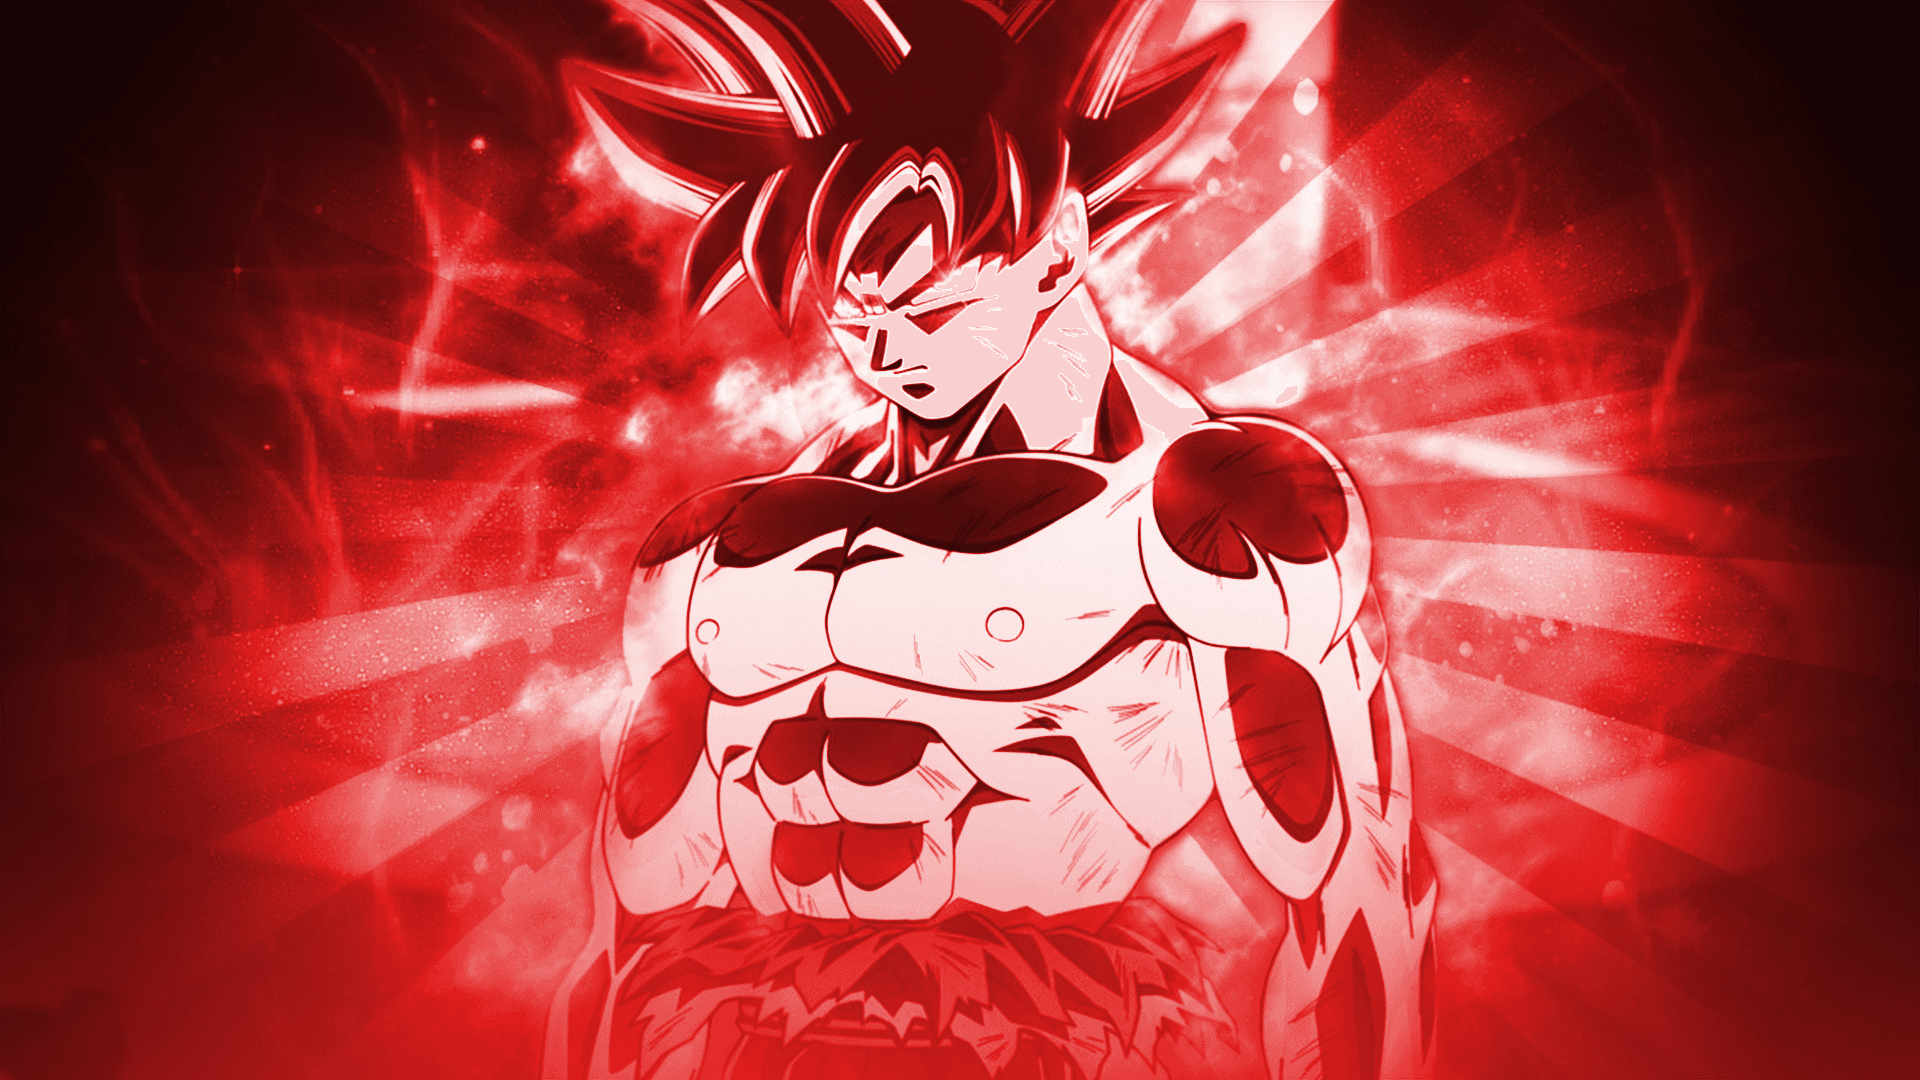 The strong and powerful Goku ready for battle